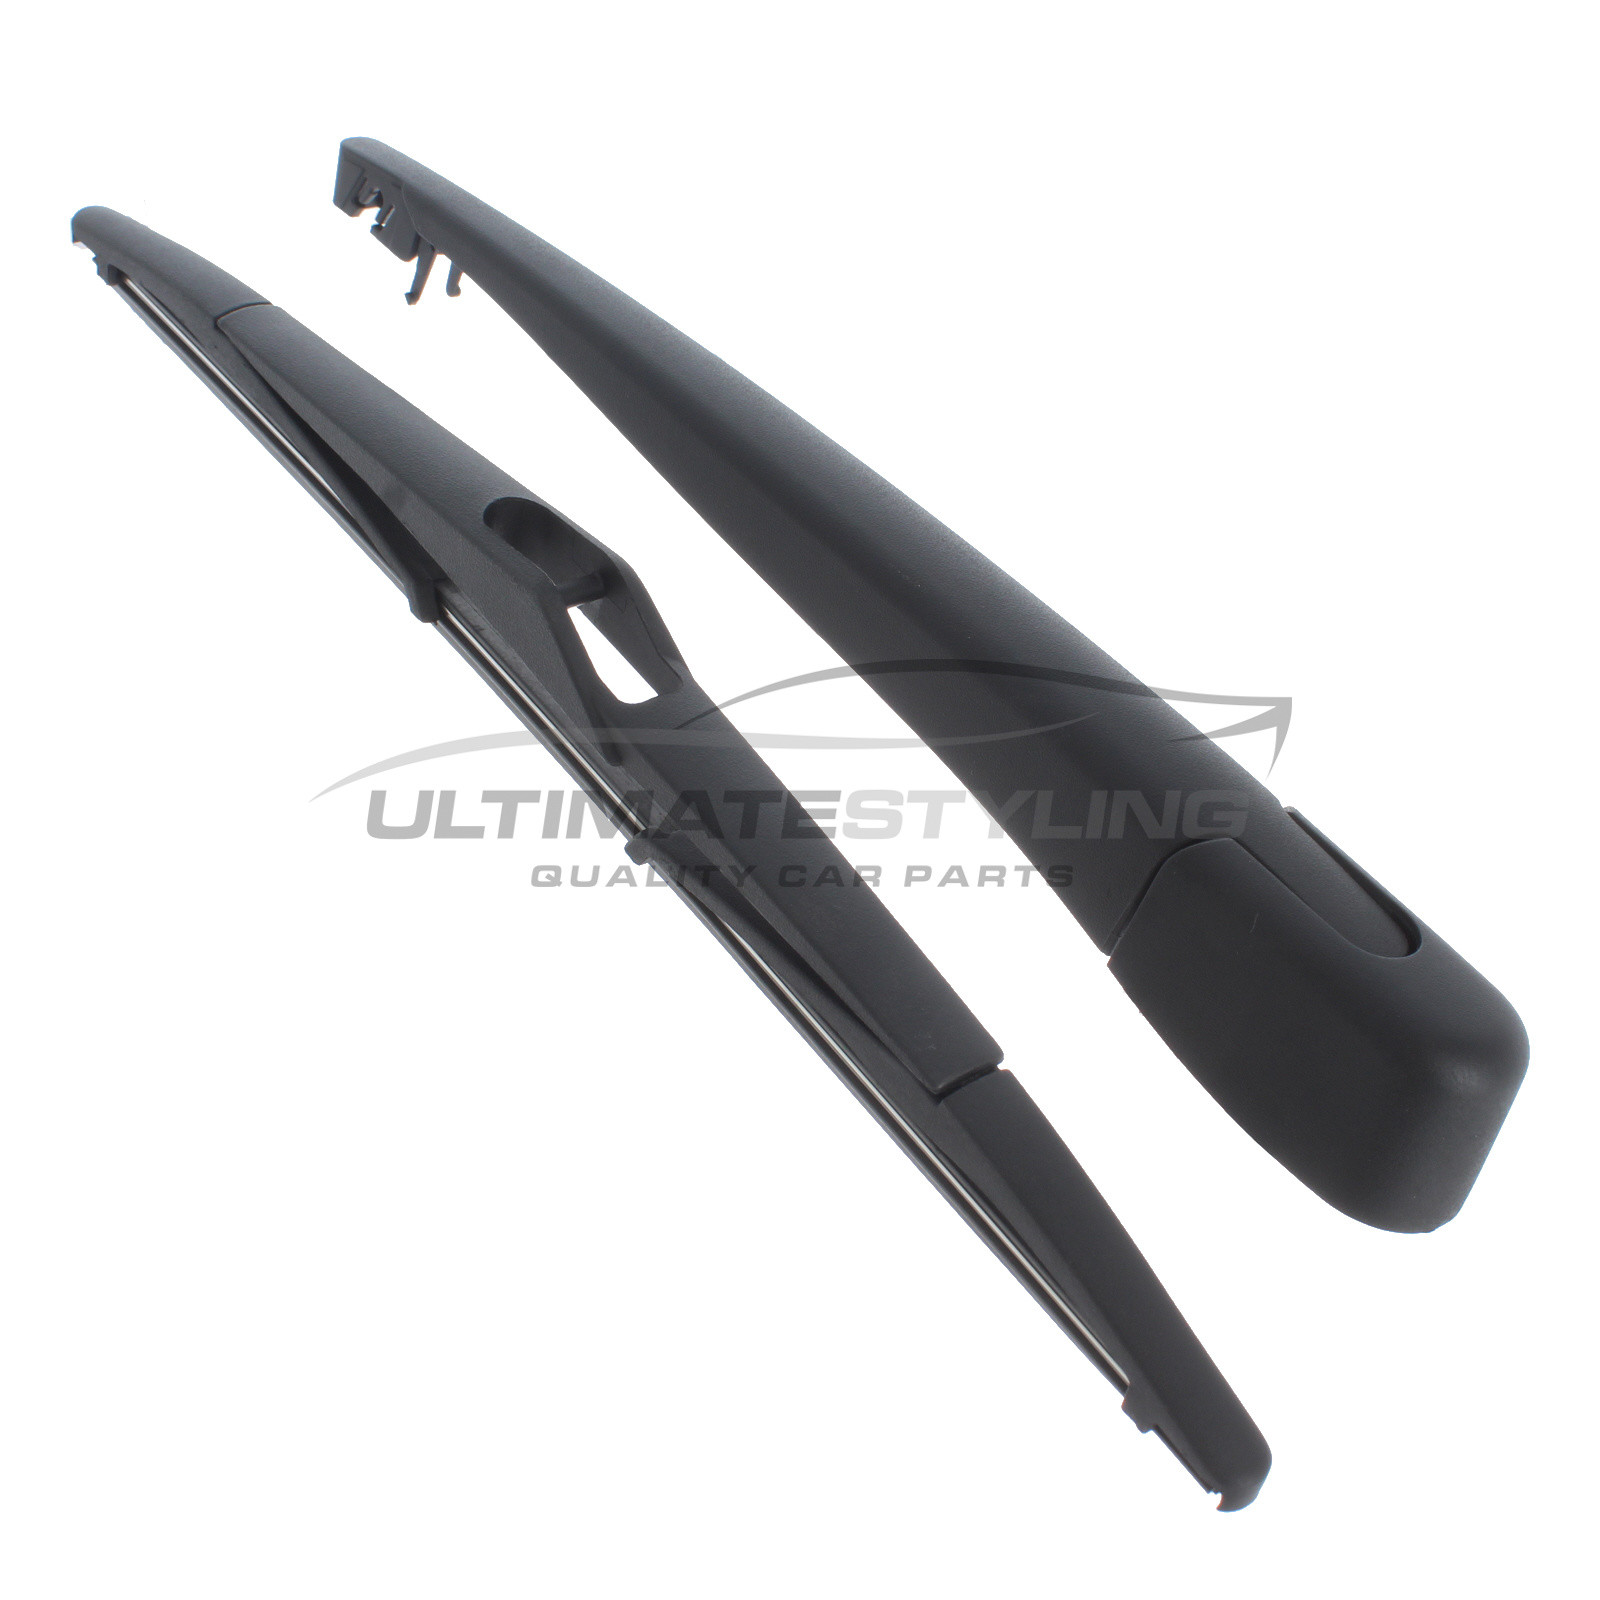 Rear Wiper Arm & Blade Set for Ford S-MAX